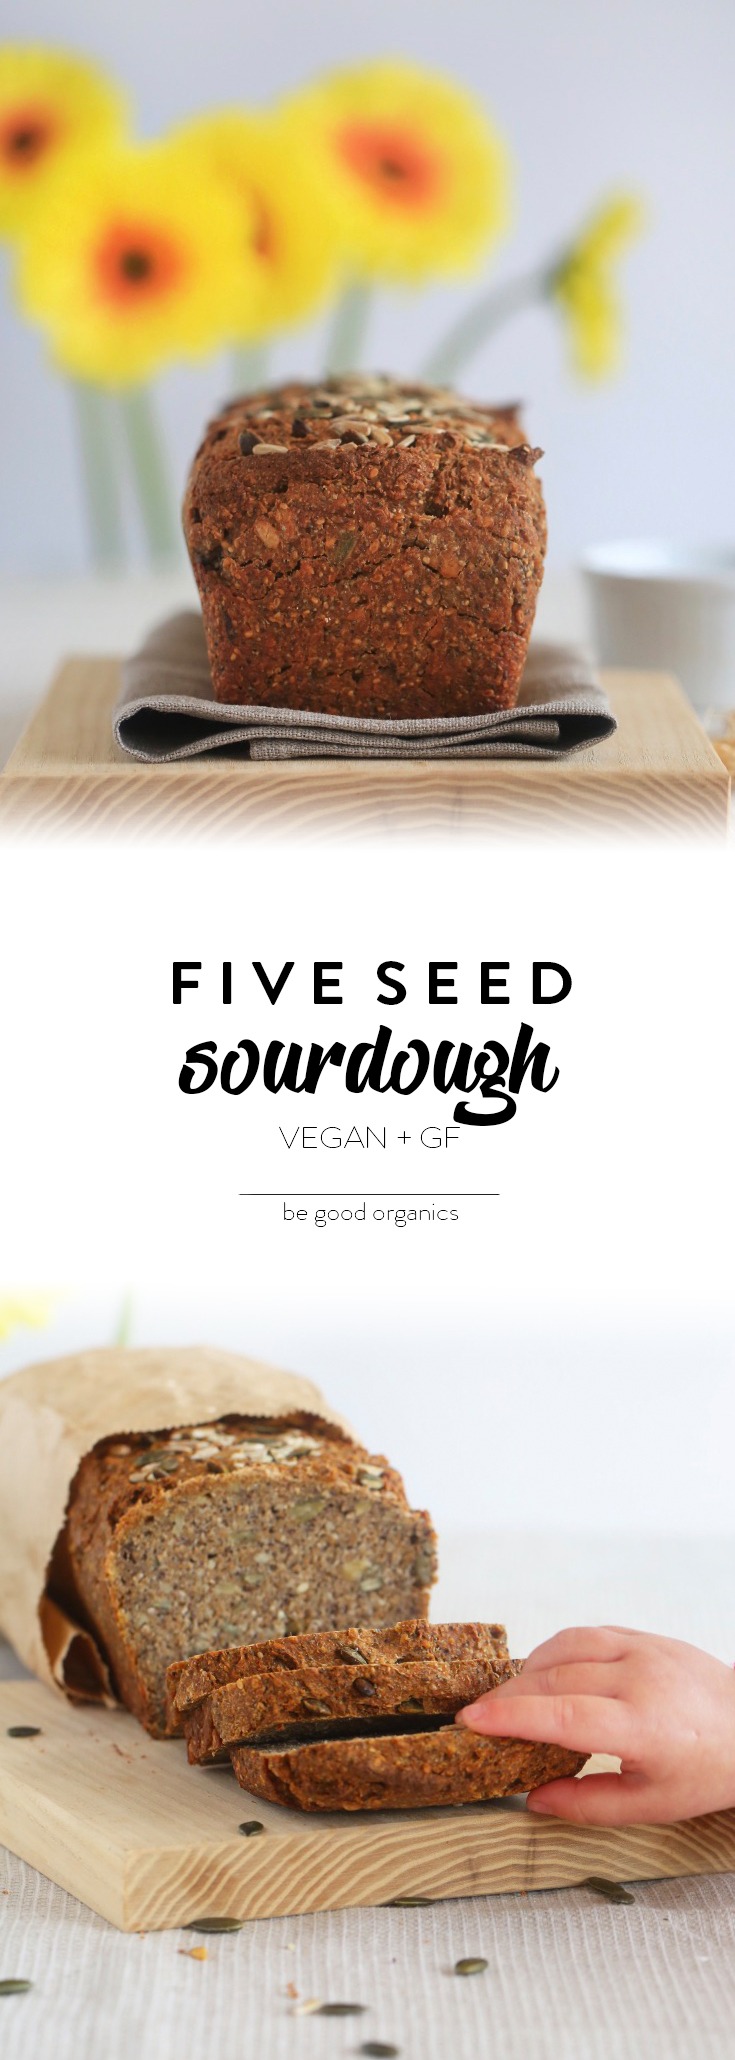 pin sliced vegan five seed sourdough bread with sunflowers in background